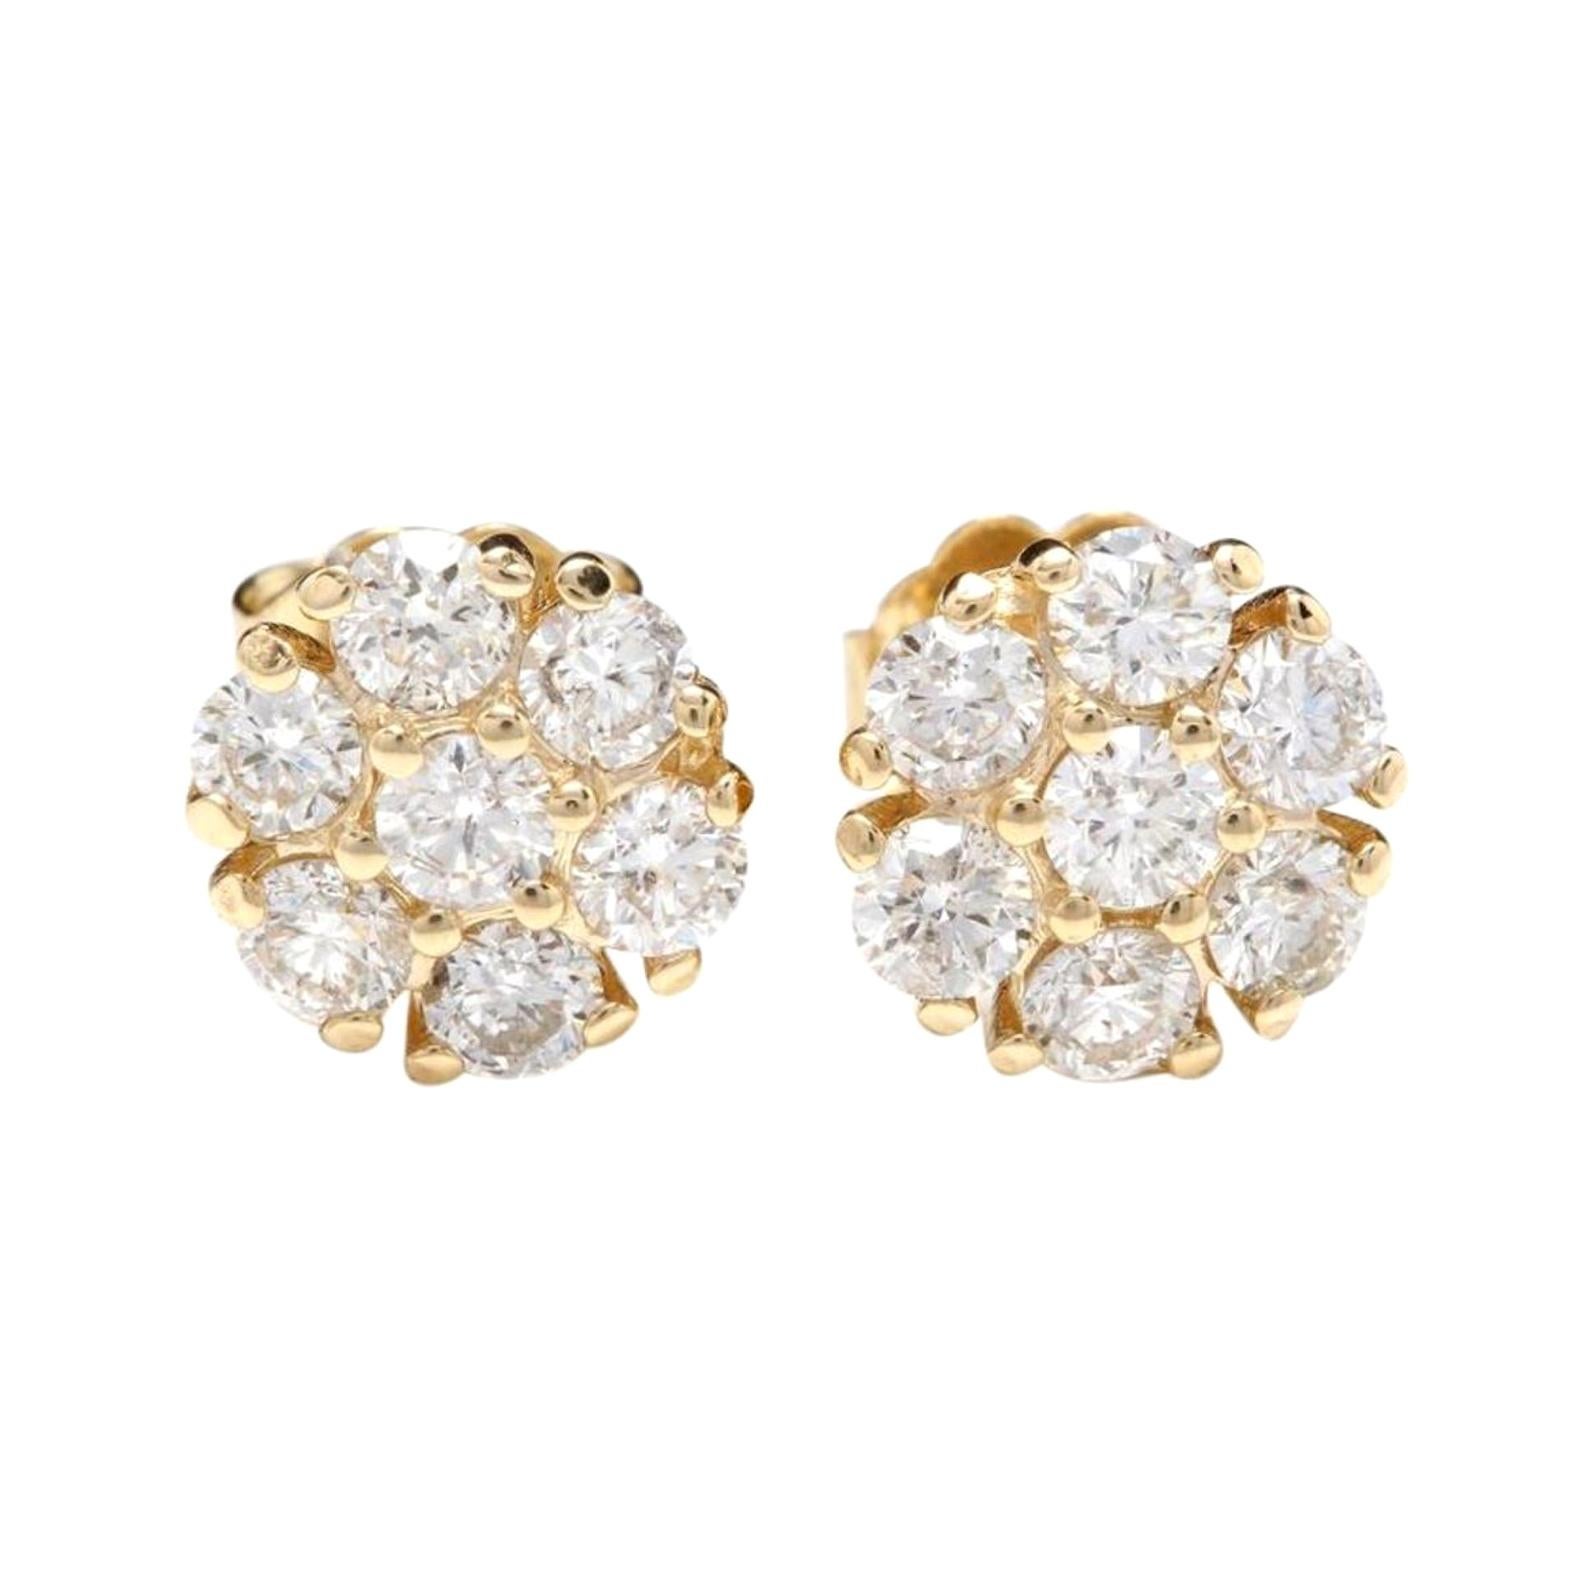 Exquisite 1.15 Carat Natural Diamond 14 Karat Solid Yellow Gold Earrings For Sale